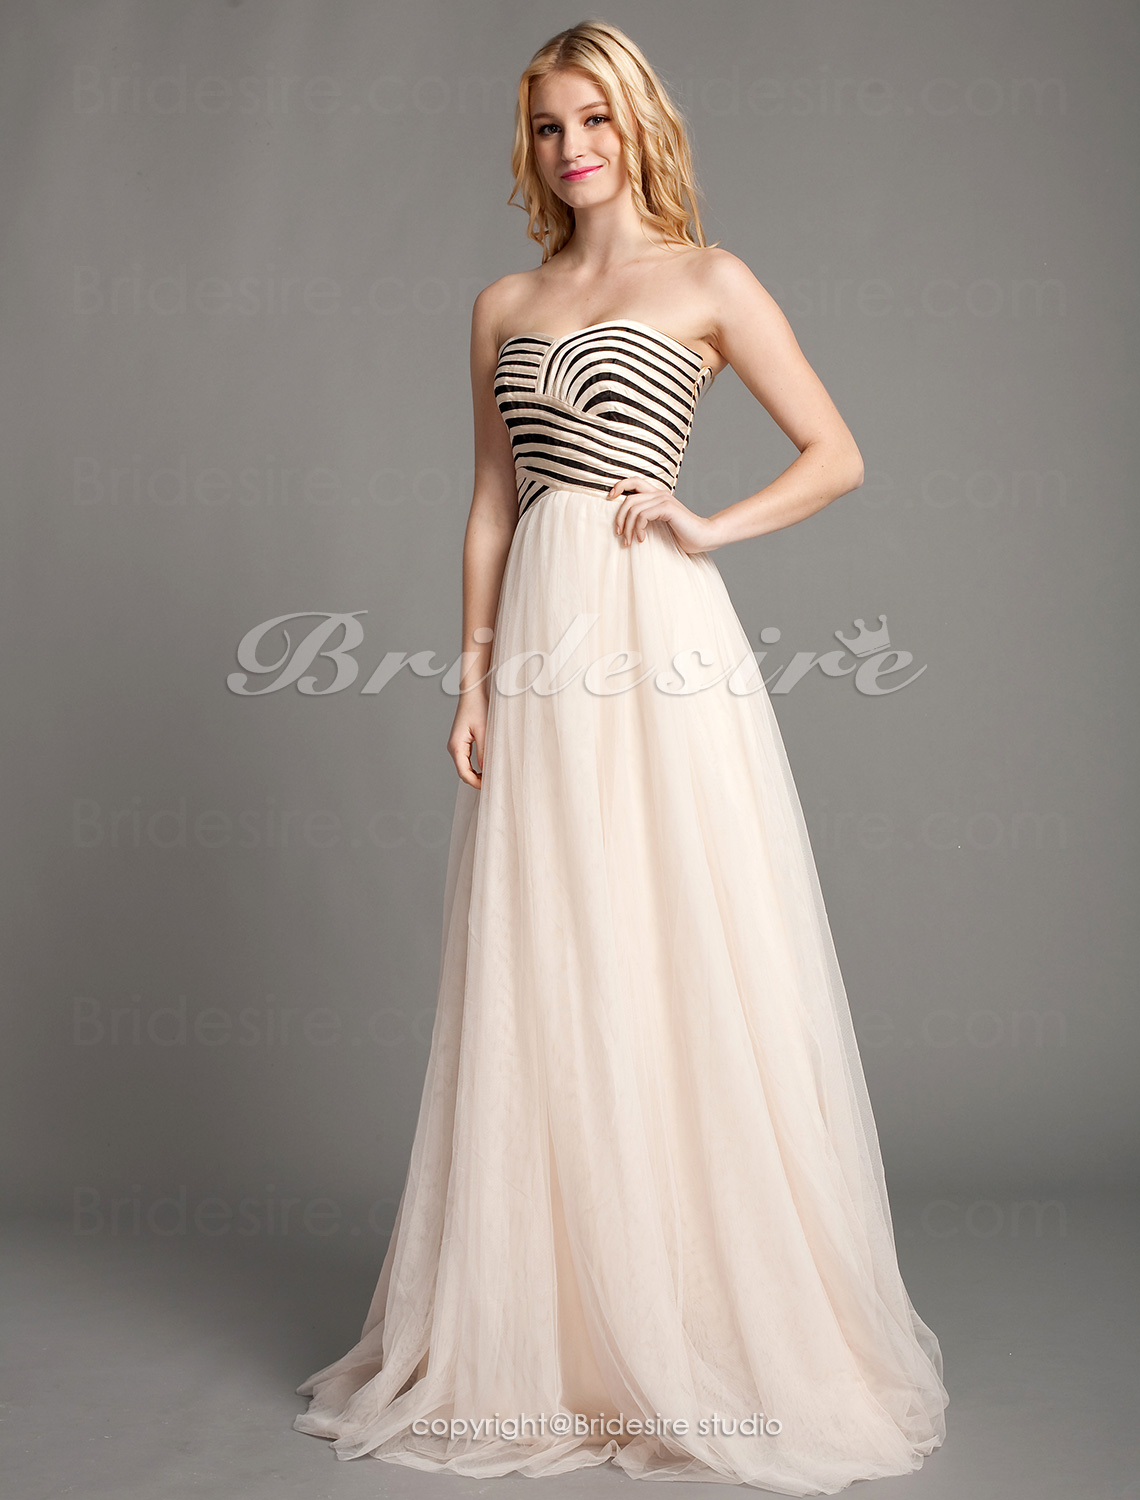 Sheath/Column Tulle Floor-length Sweetheart Evening Dress With Criss Cross And Draping